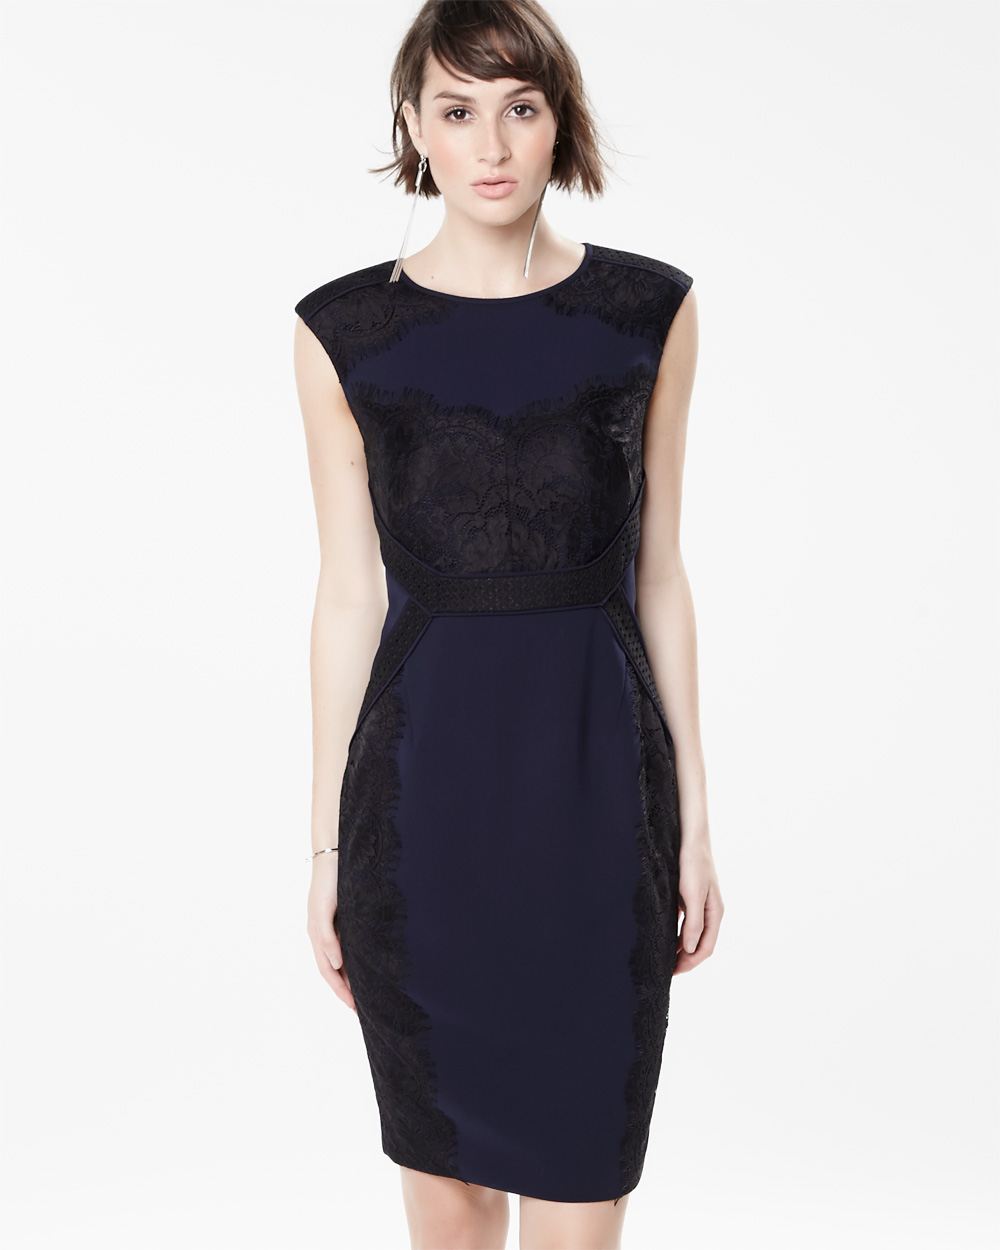 Fitted sleeveless dress with lace | RW&CO.